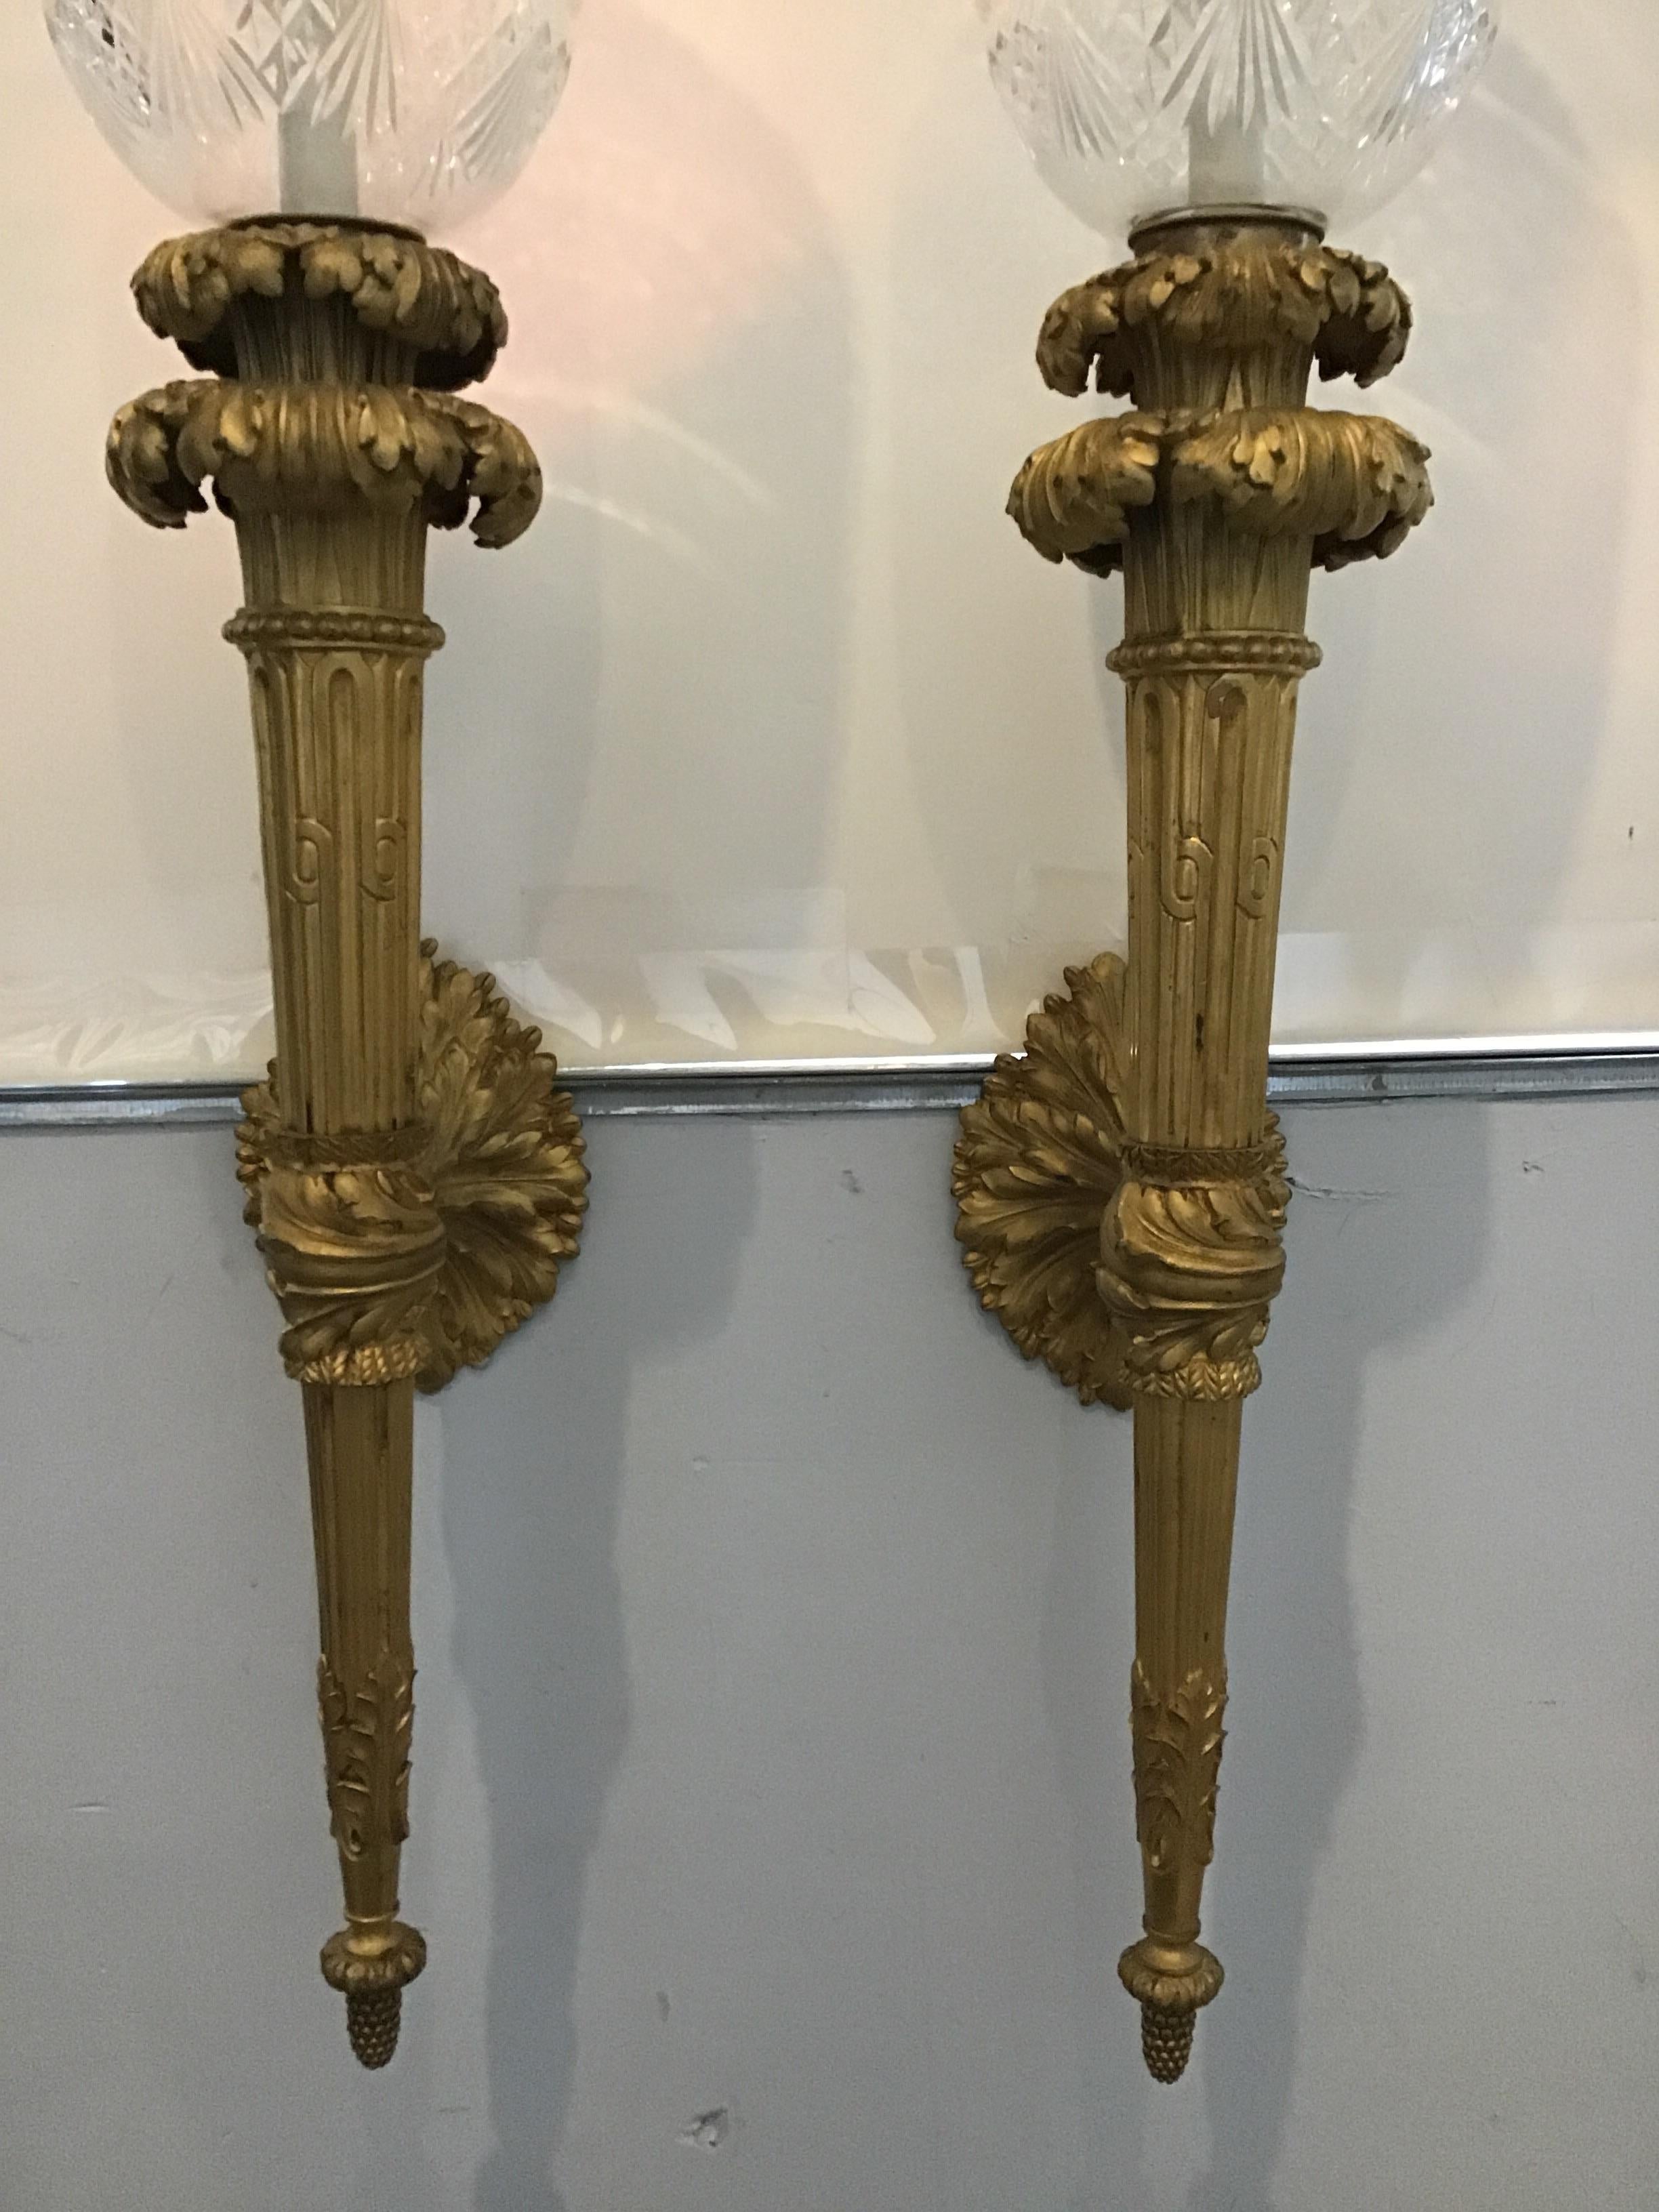 1860s Large French Gilt Bronze Torch Sconces In Good Condition For Sale In Tarrytown, NY